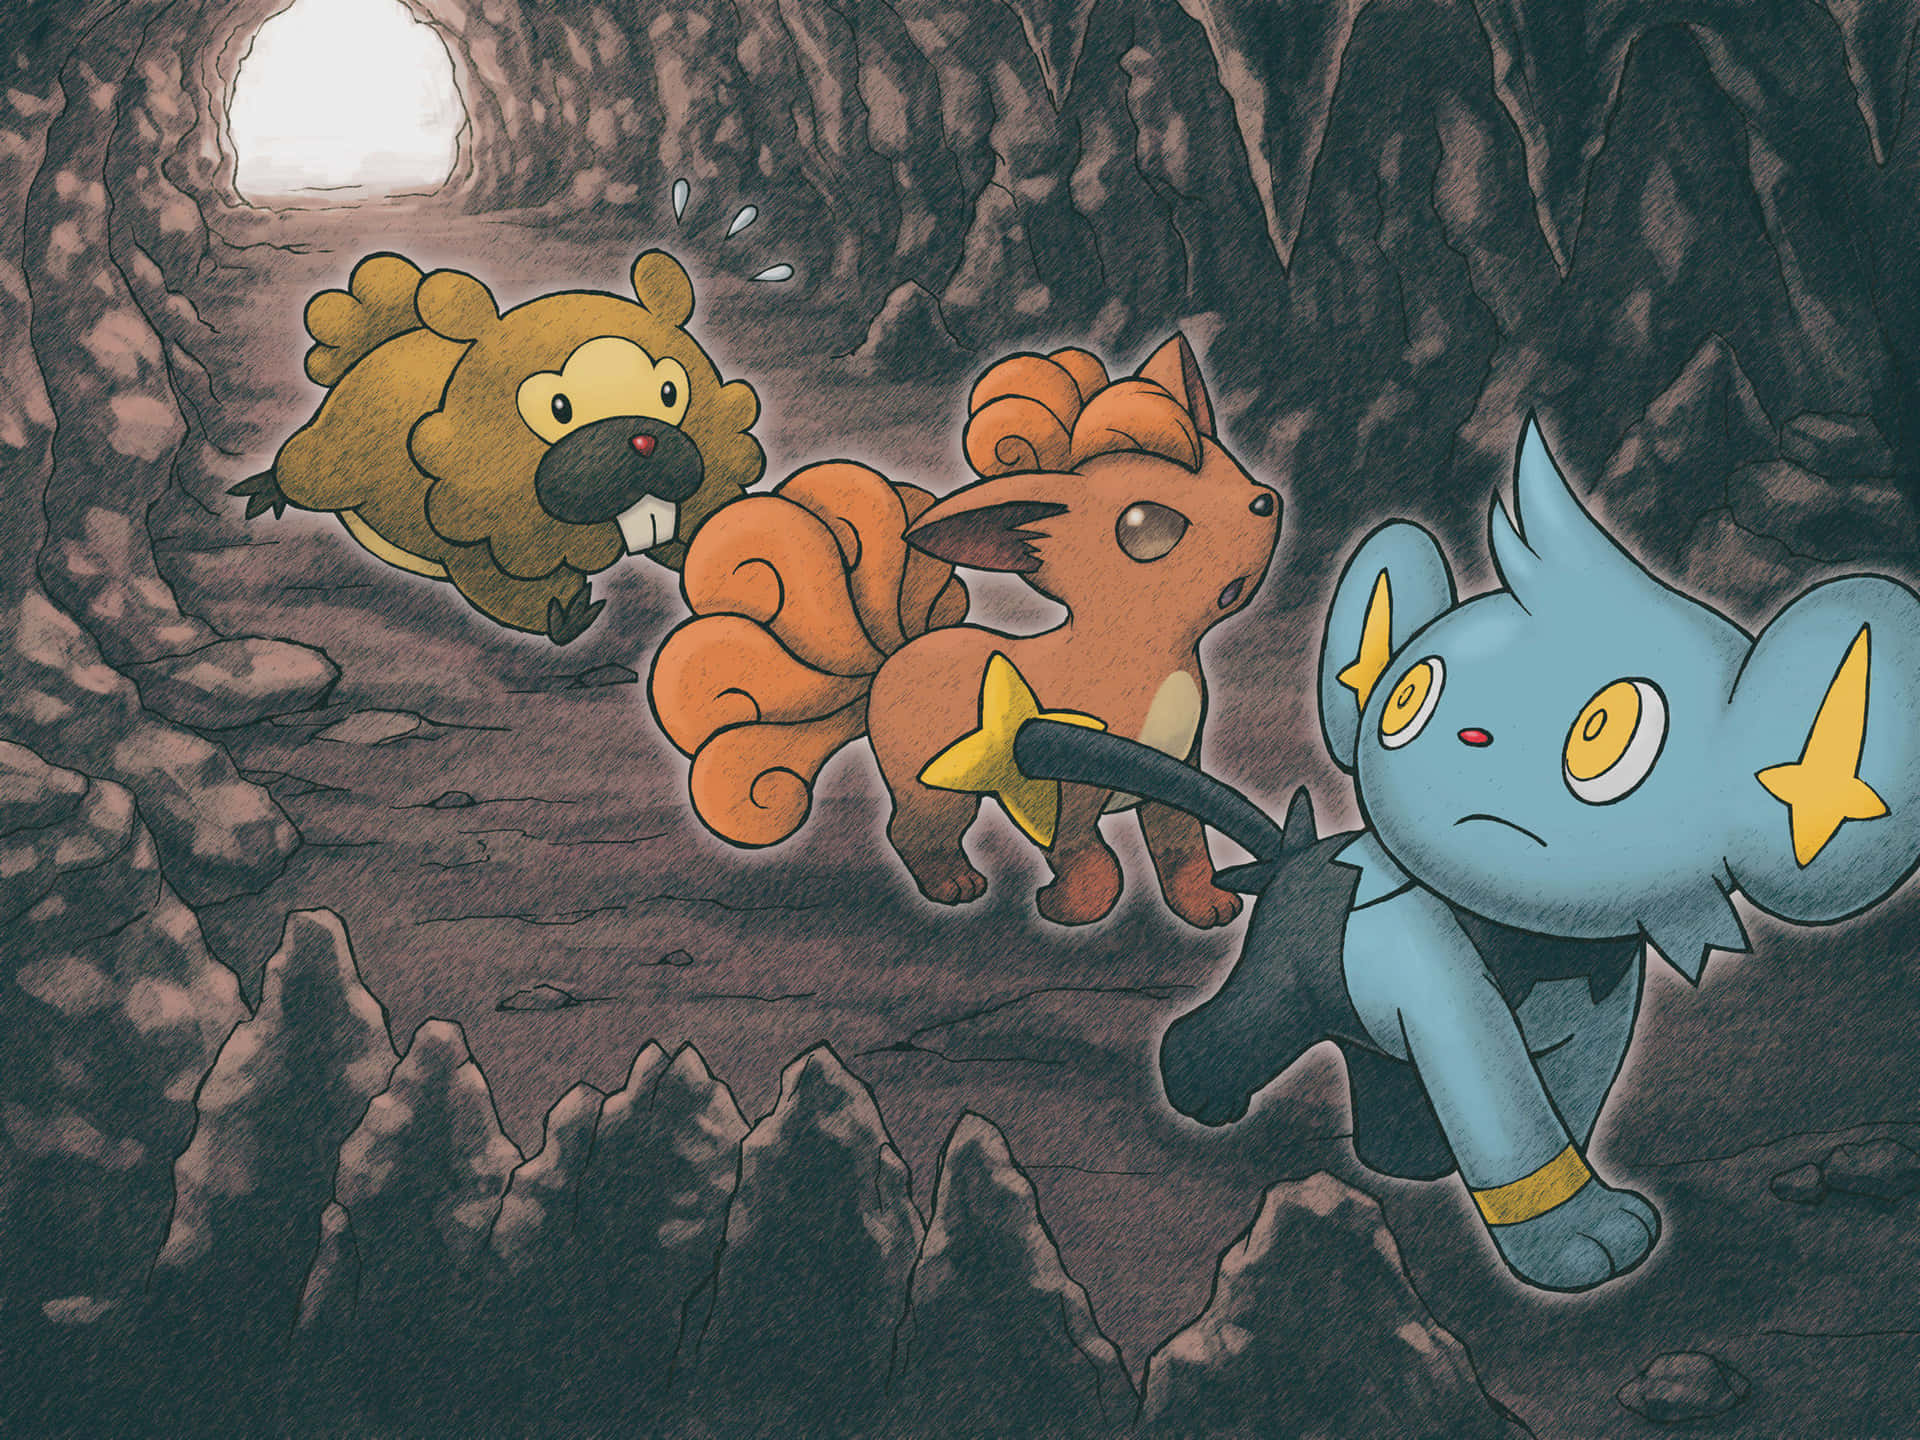 Explore a world of adventure with the Pokemon Mystery Dungeon!